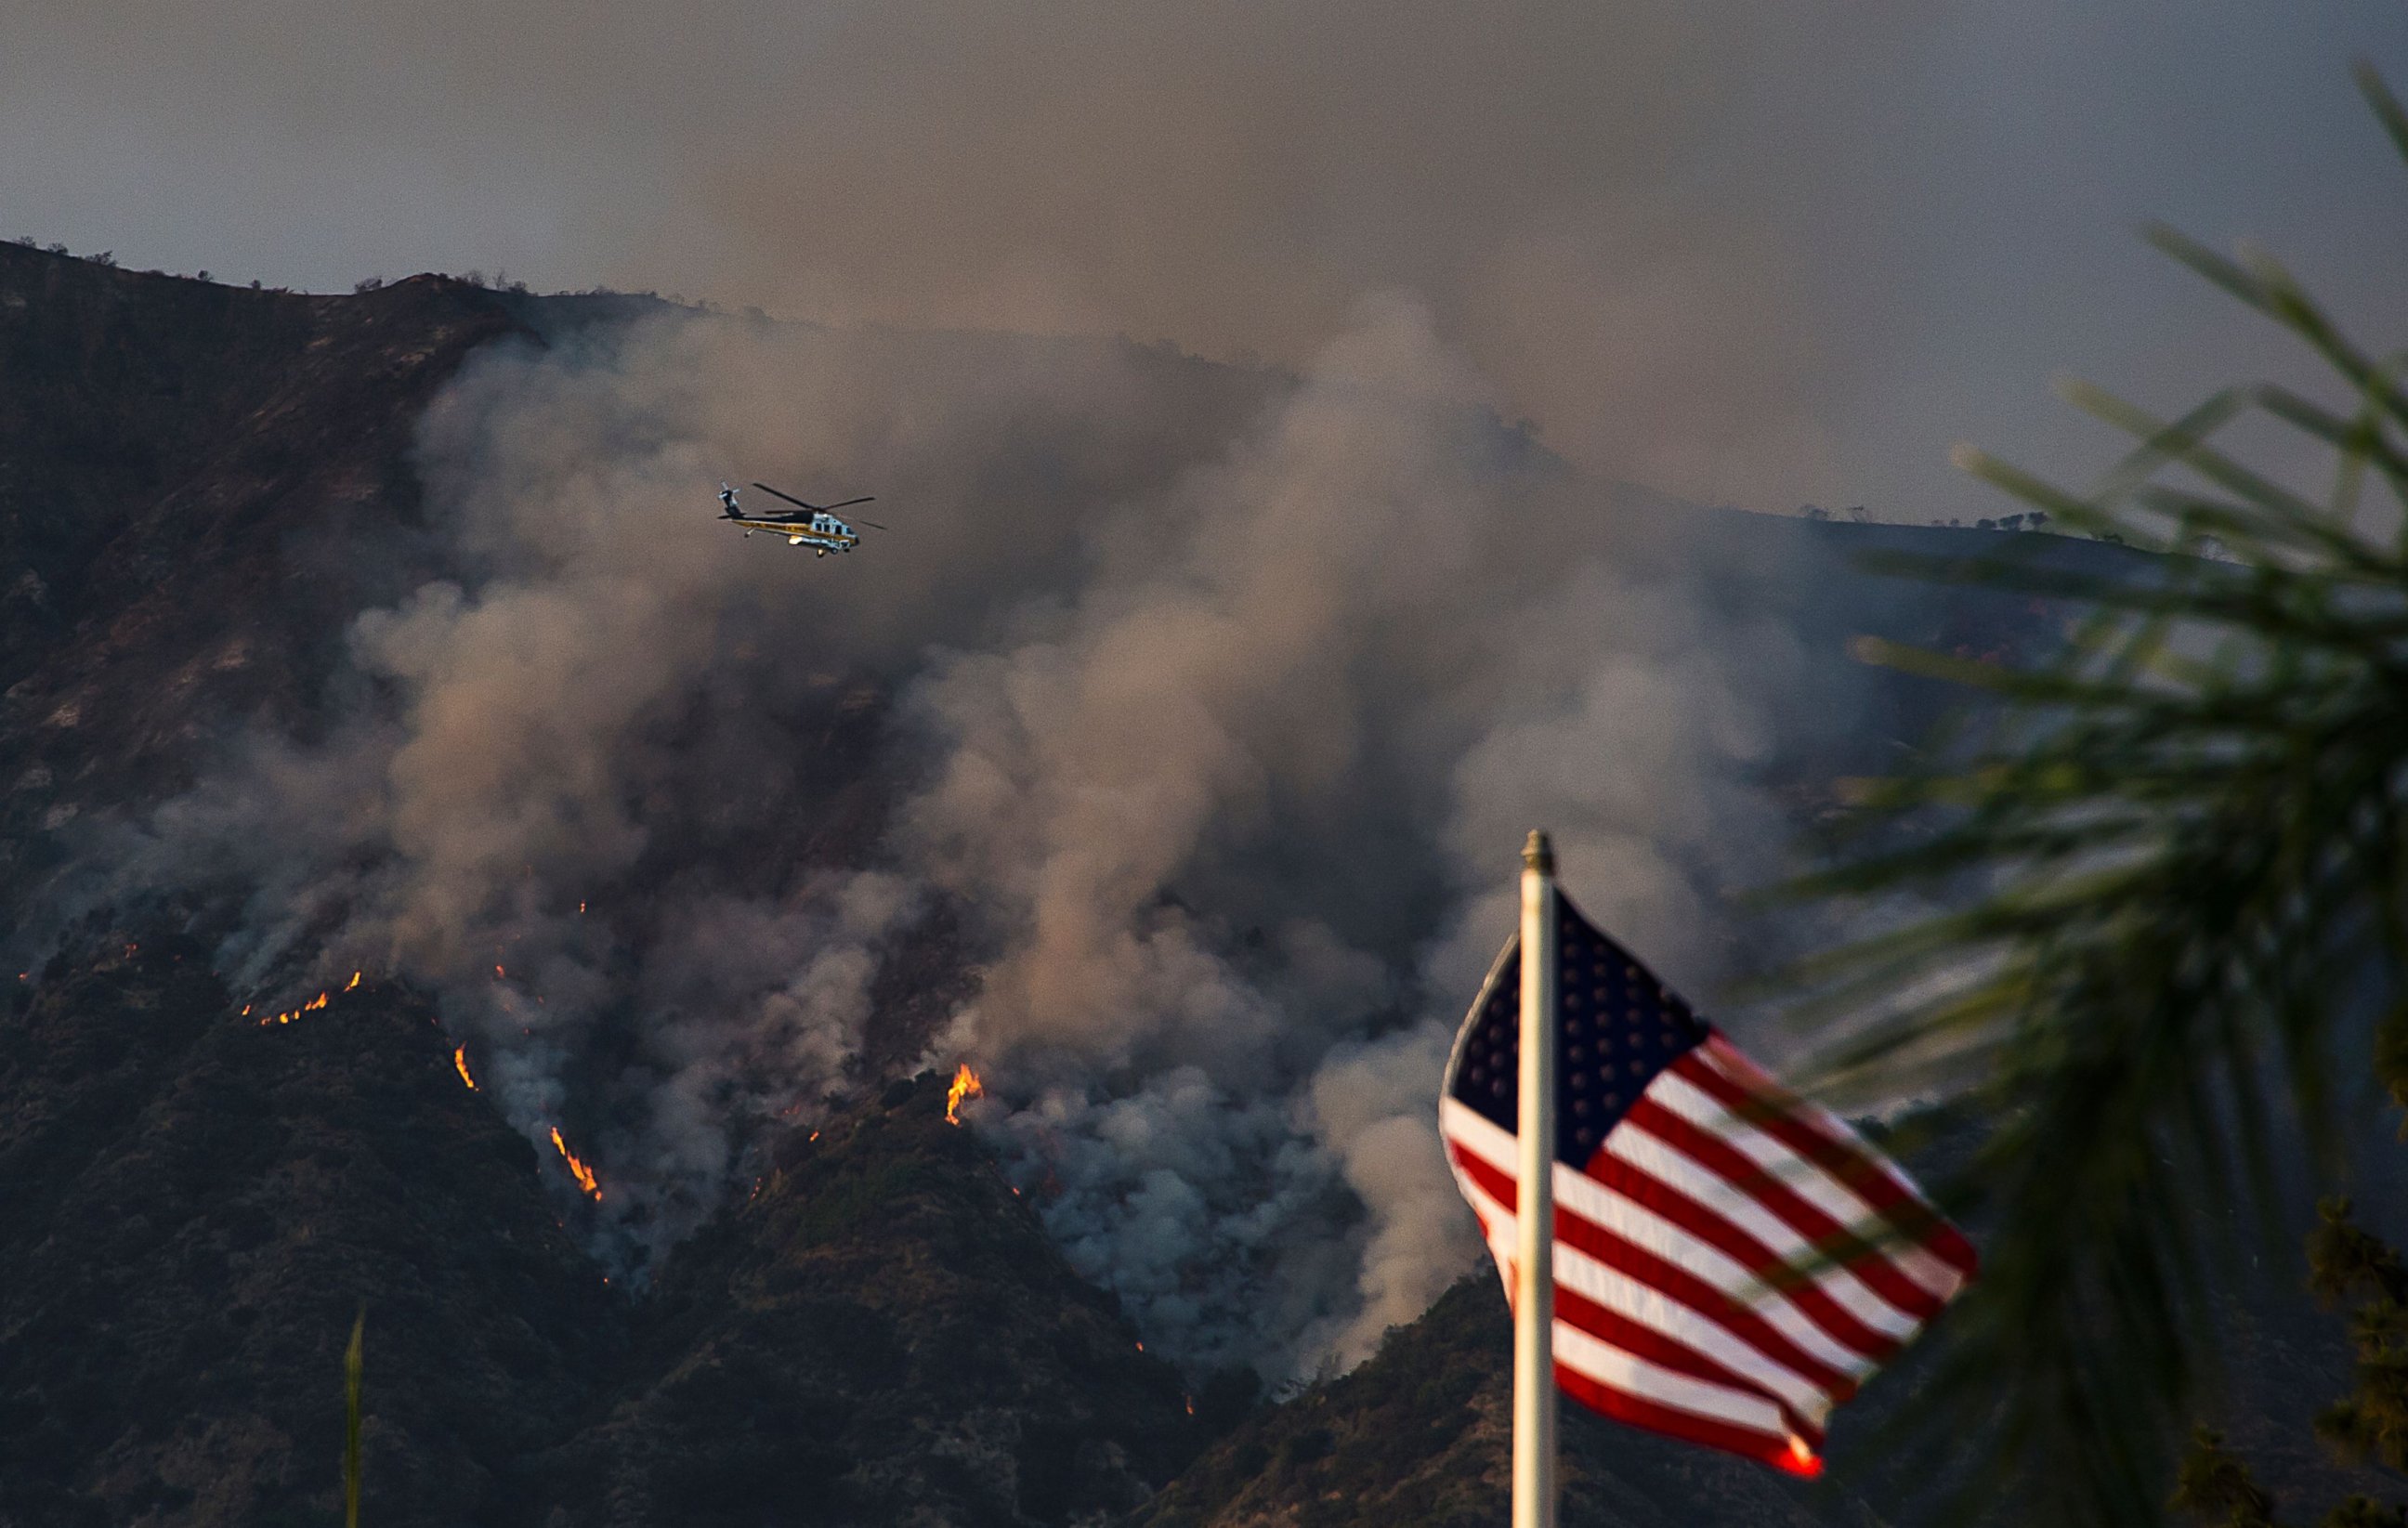 PHOTO: A Los Angeles County Fire helicopter flies over smoke and flames at the San Gabriel Complex Fire in the Angeles National Forest, June 21, 2016 near Duarte, Calif.